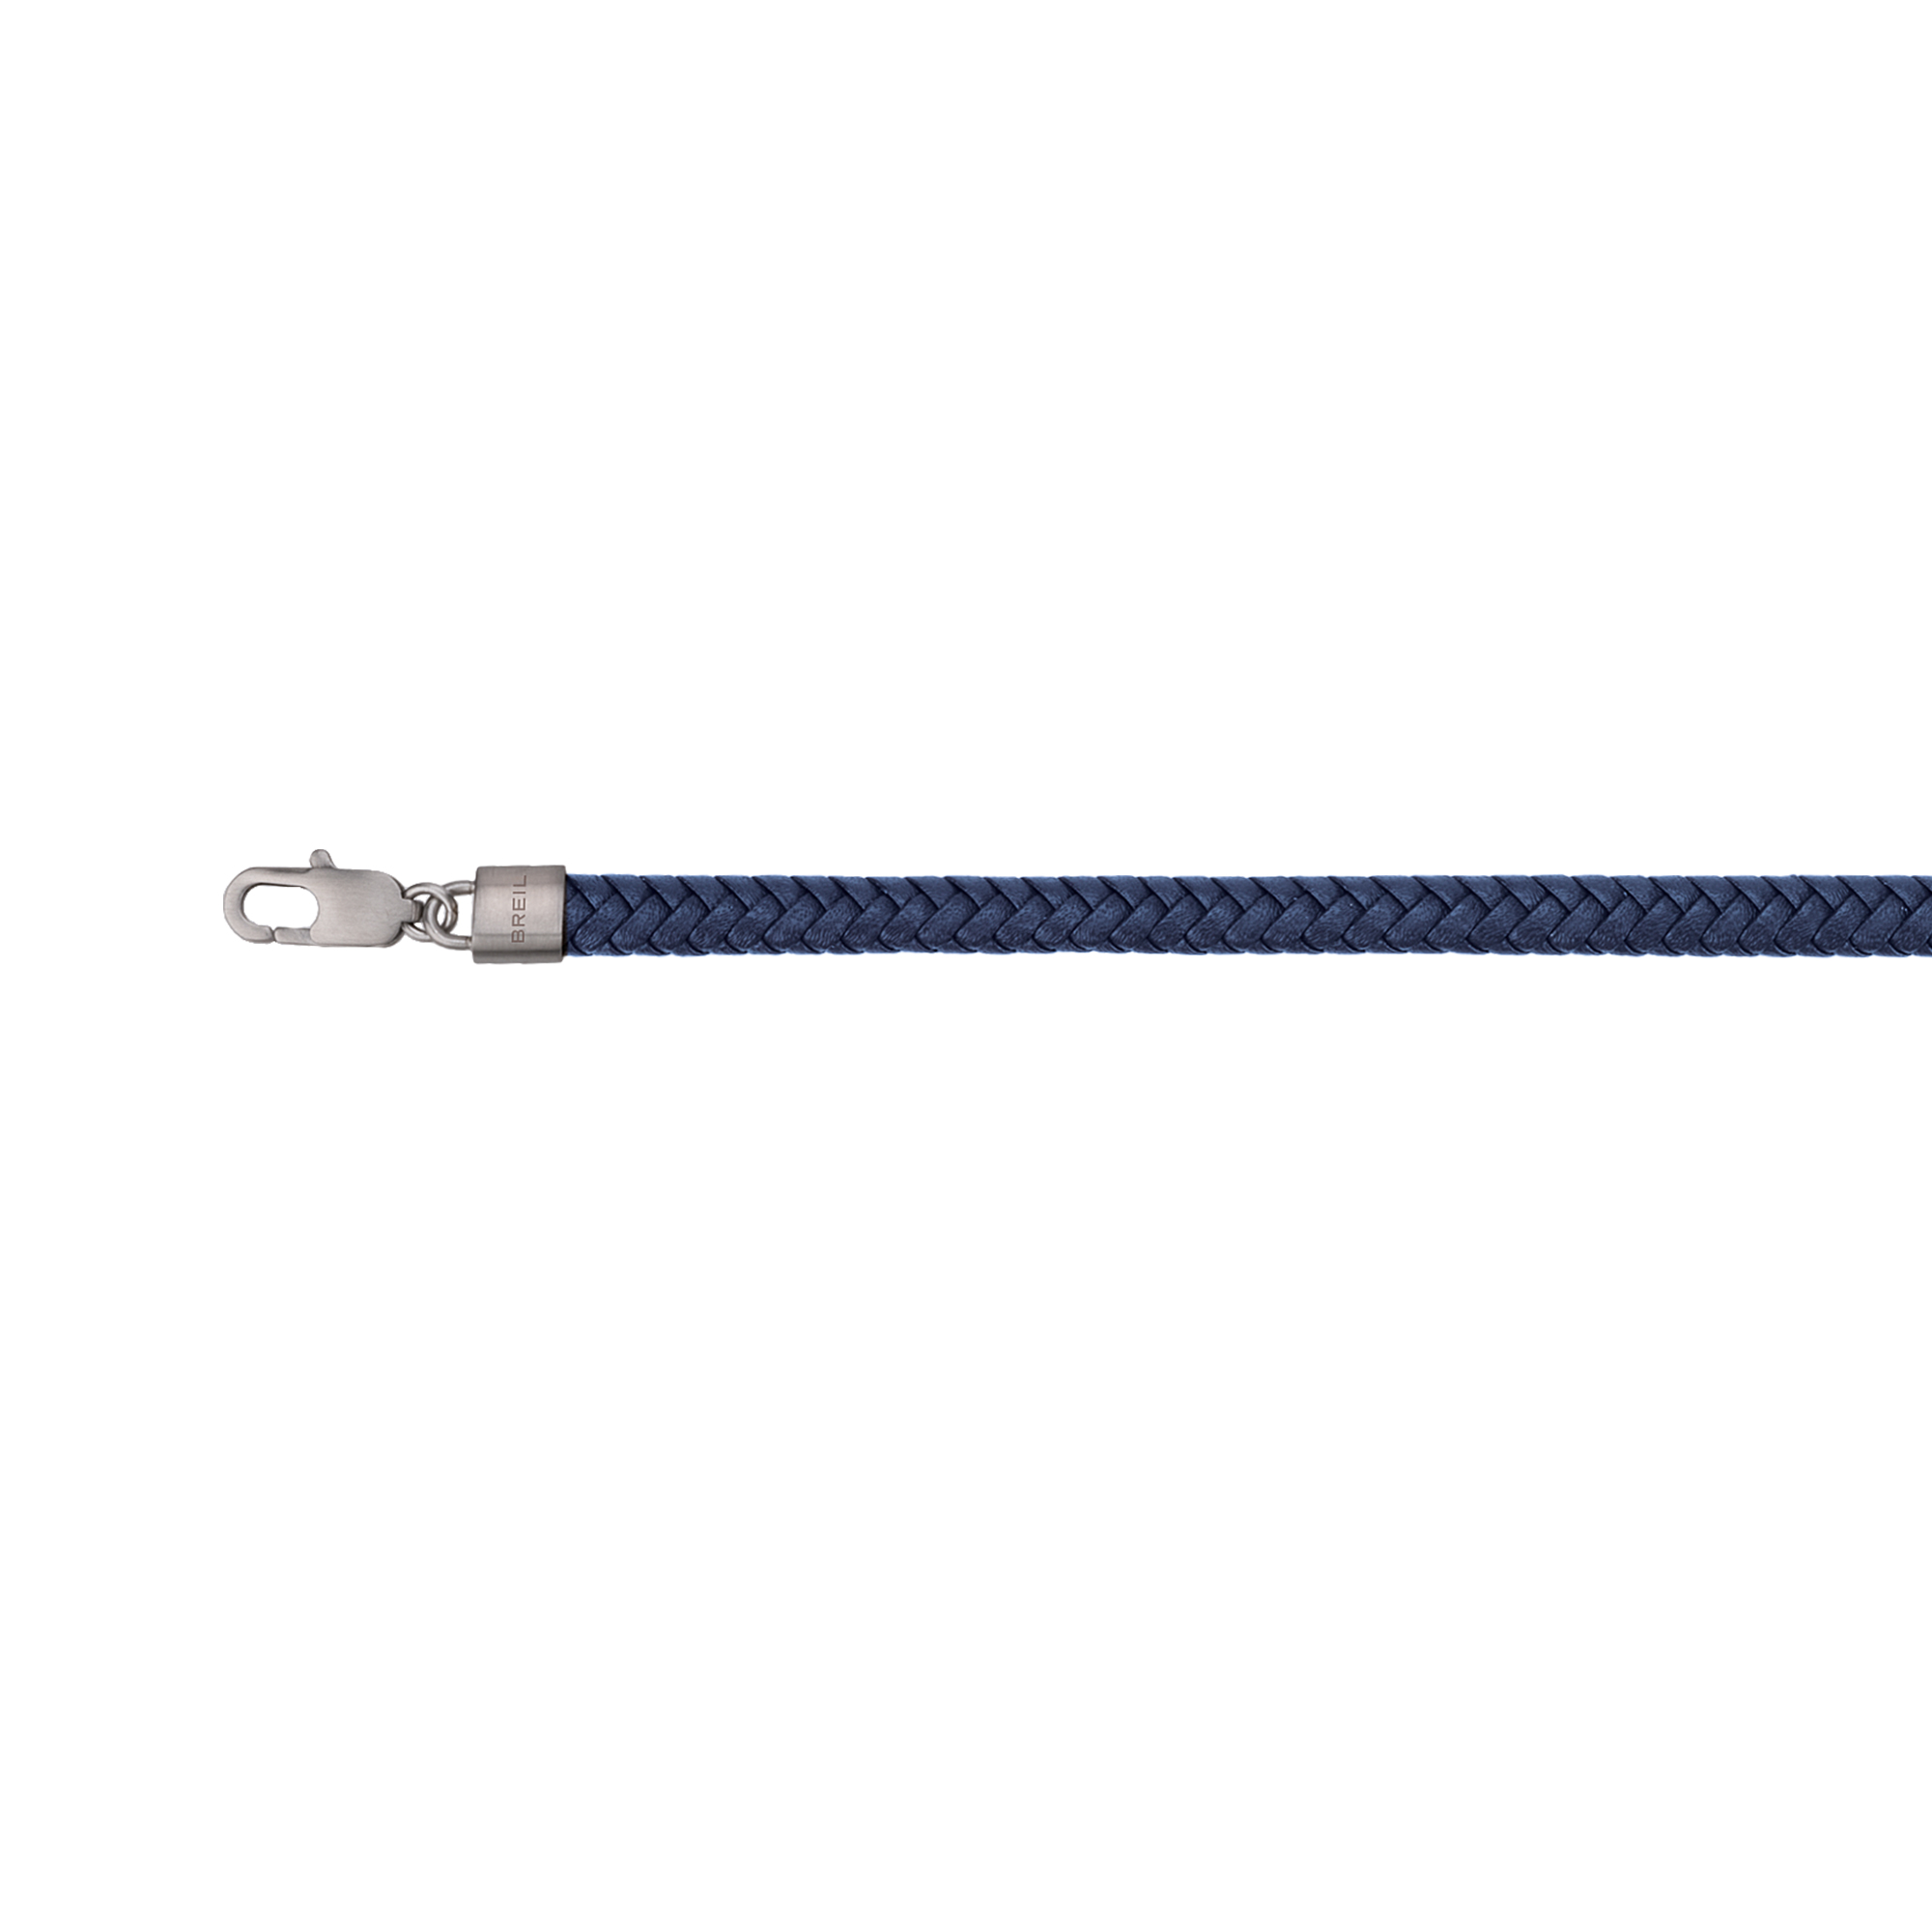 B MIX - BRACELET IN BLUE WOVEN LEATHER AND STEEL - 2 - TJ3137 | Breil